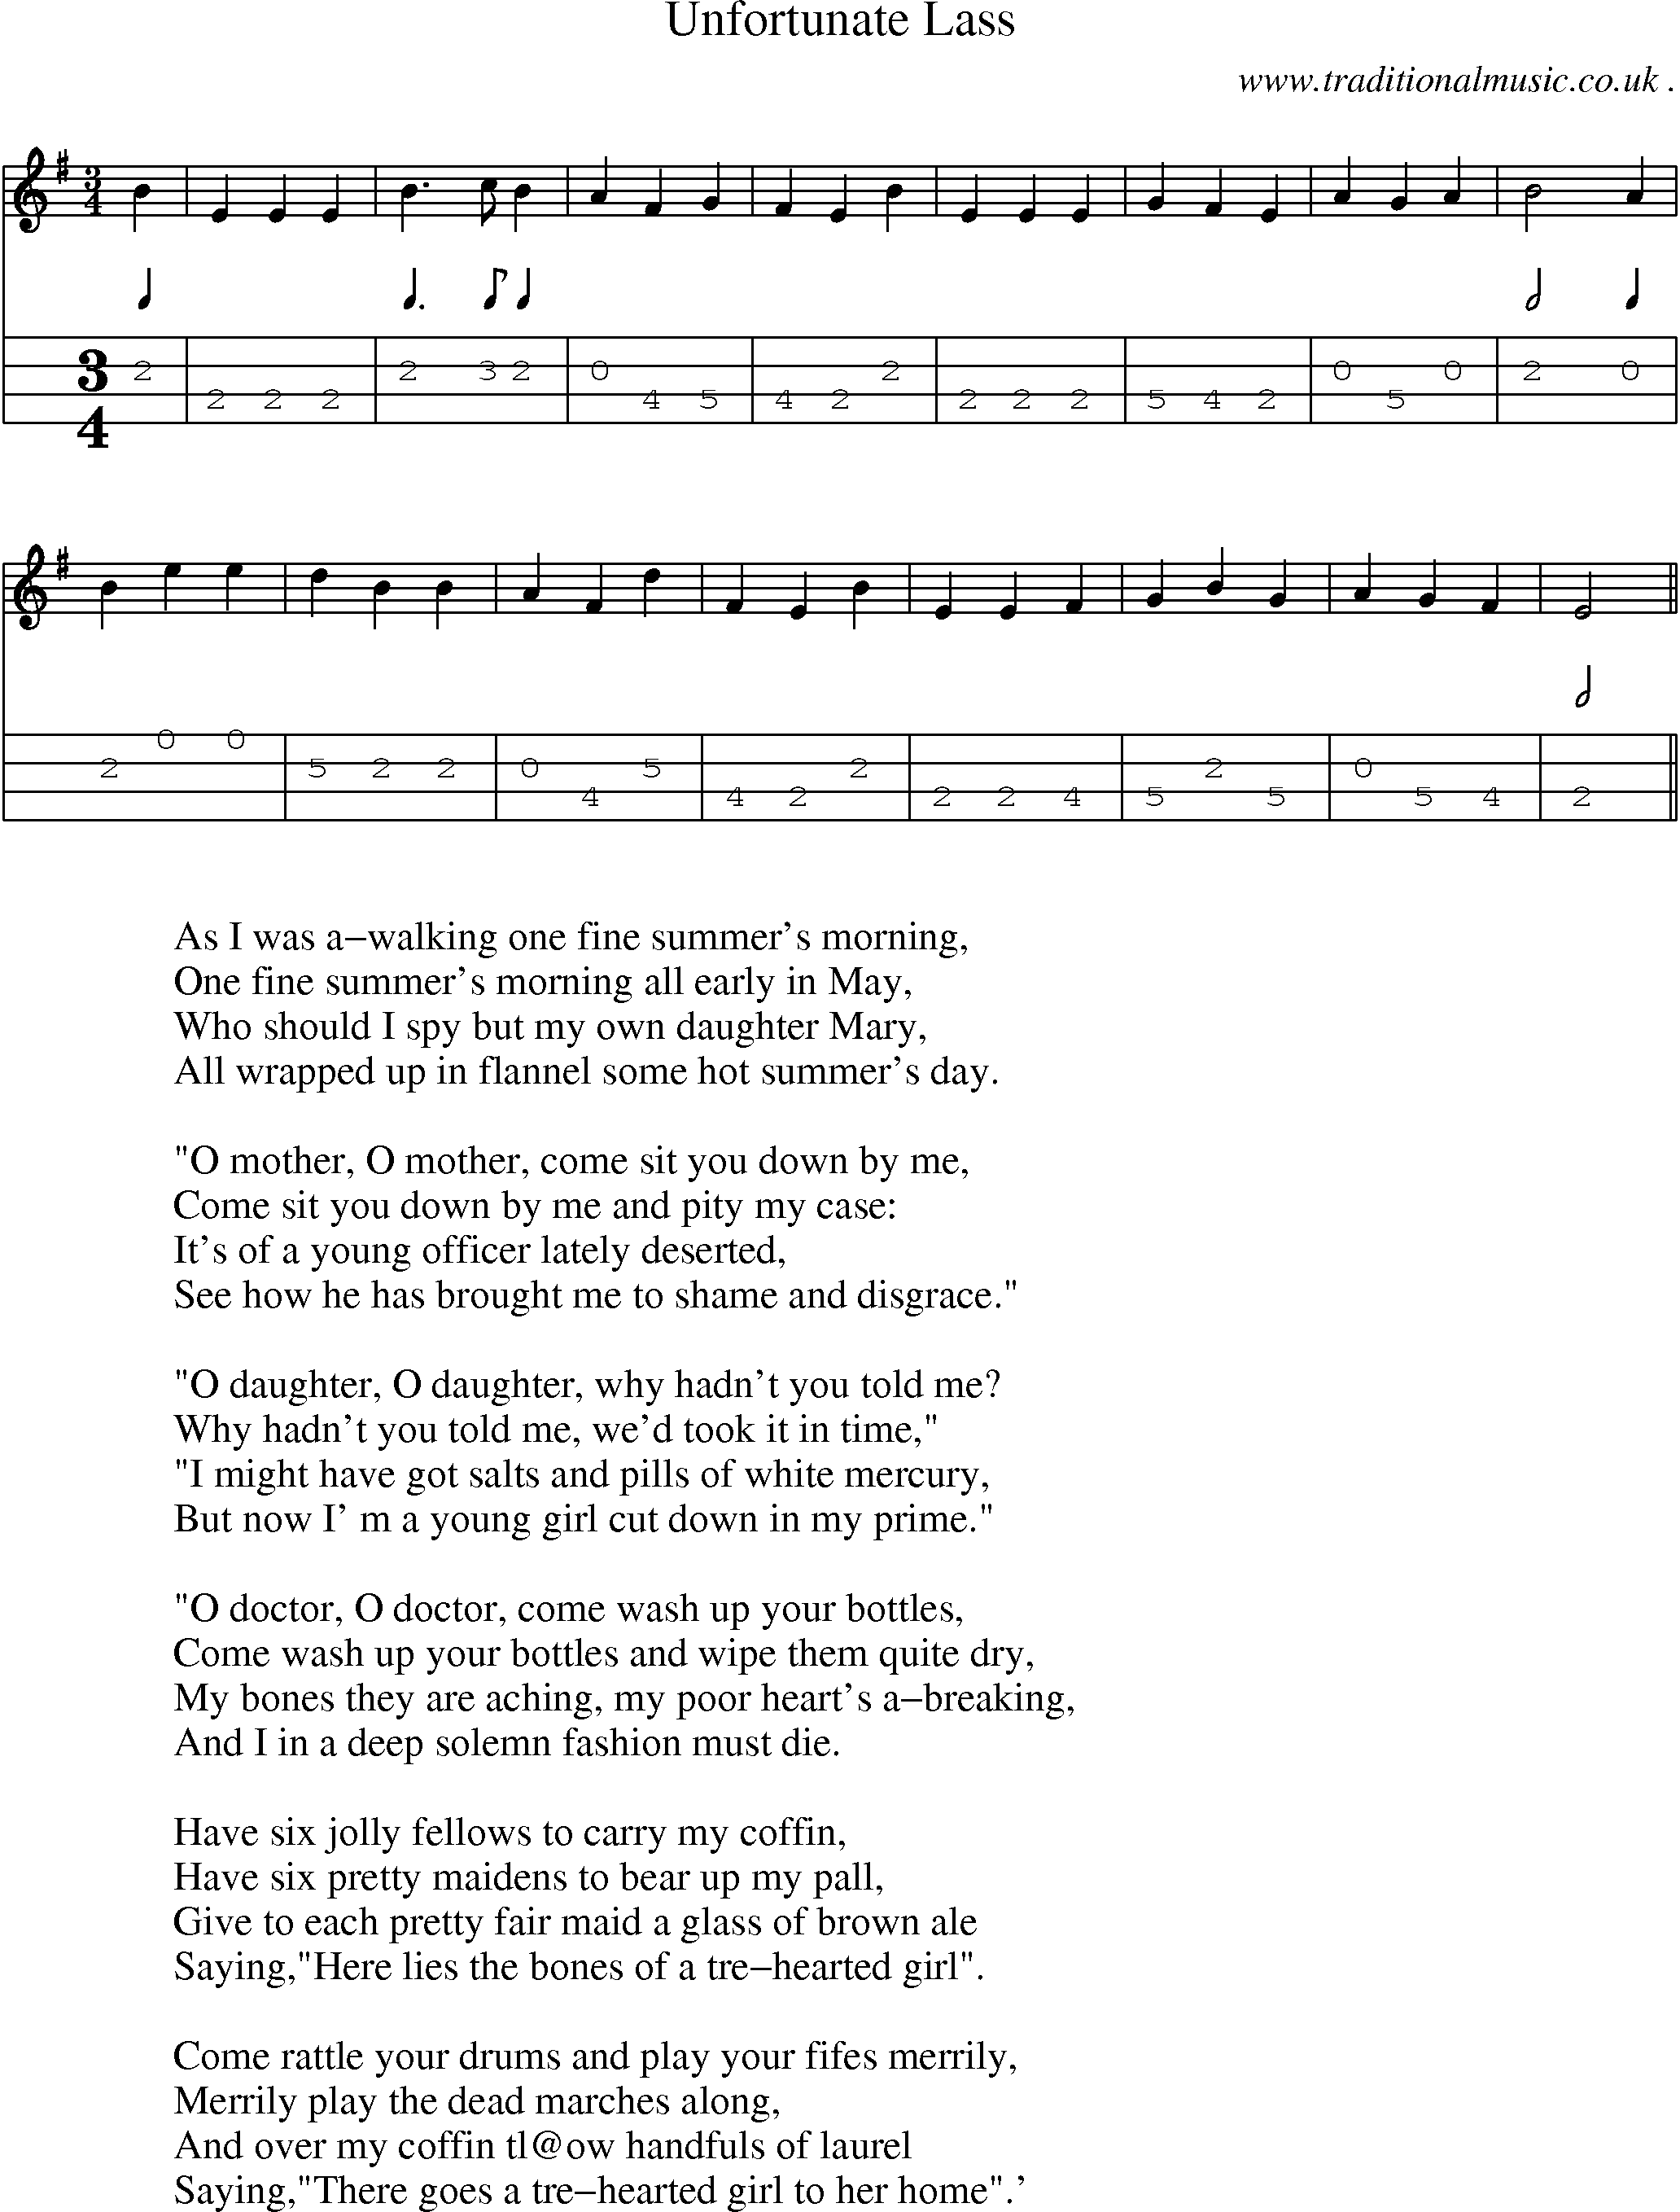 Sheet-Music and Mandolin Tabs for Unfortunate Lass